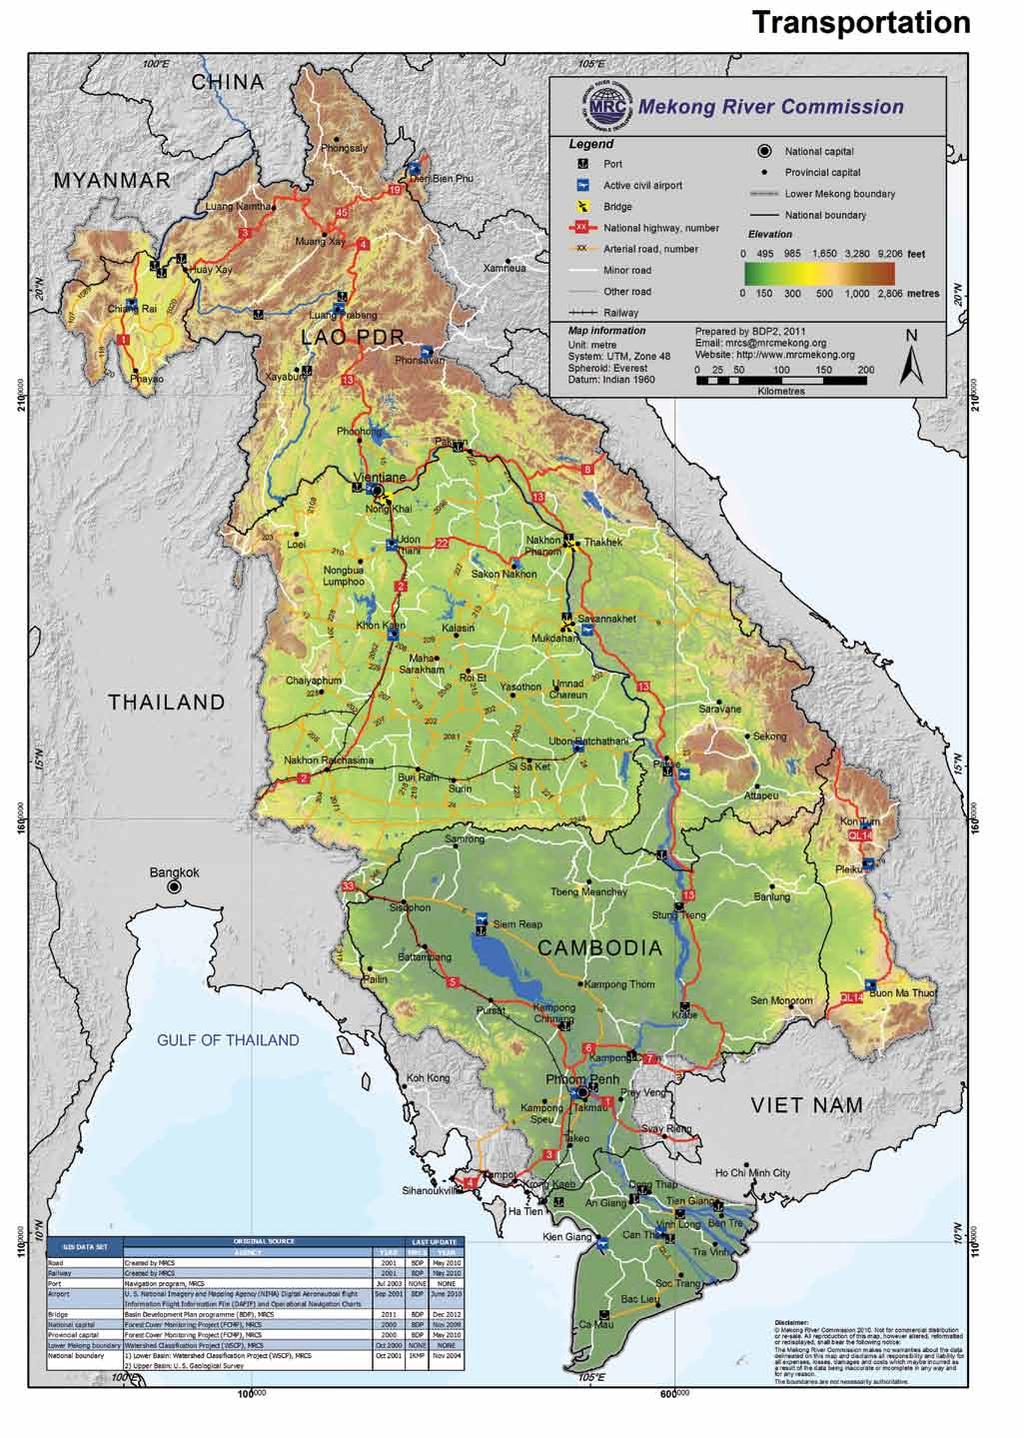 44 Planning Atlas of the Lower Mekong River